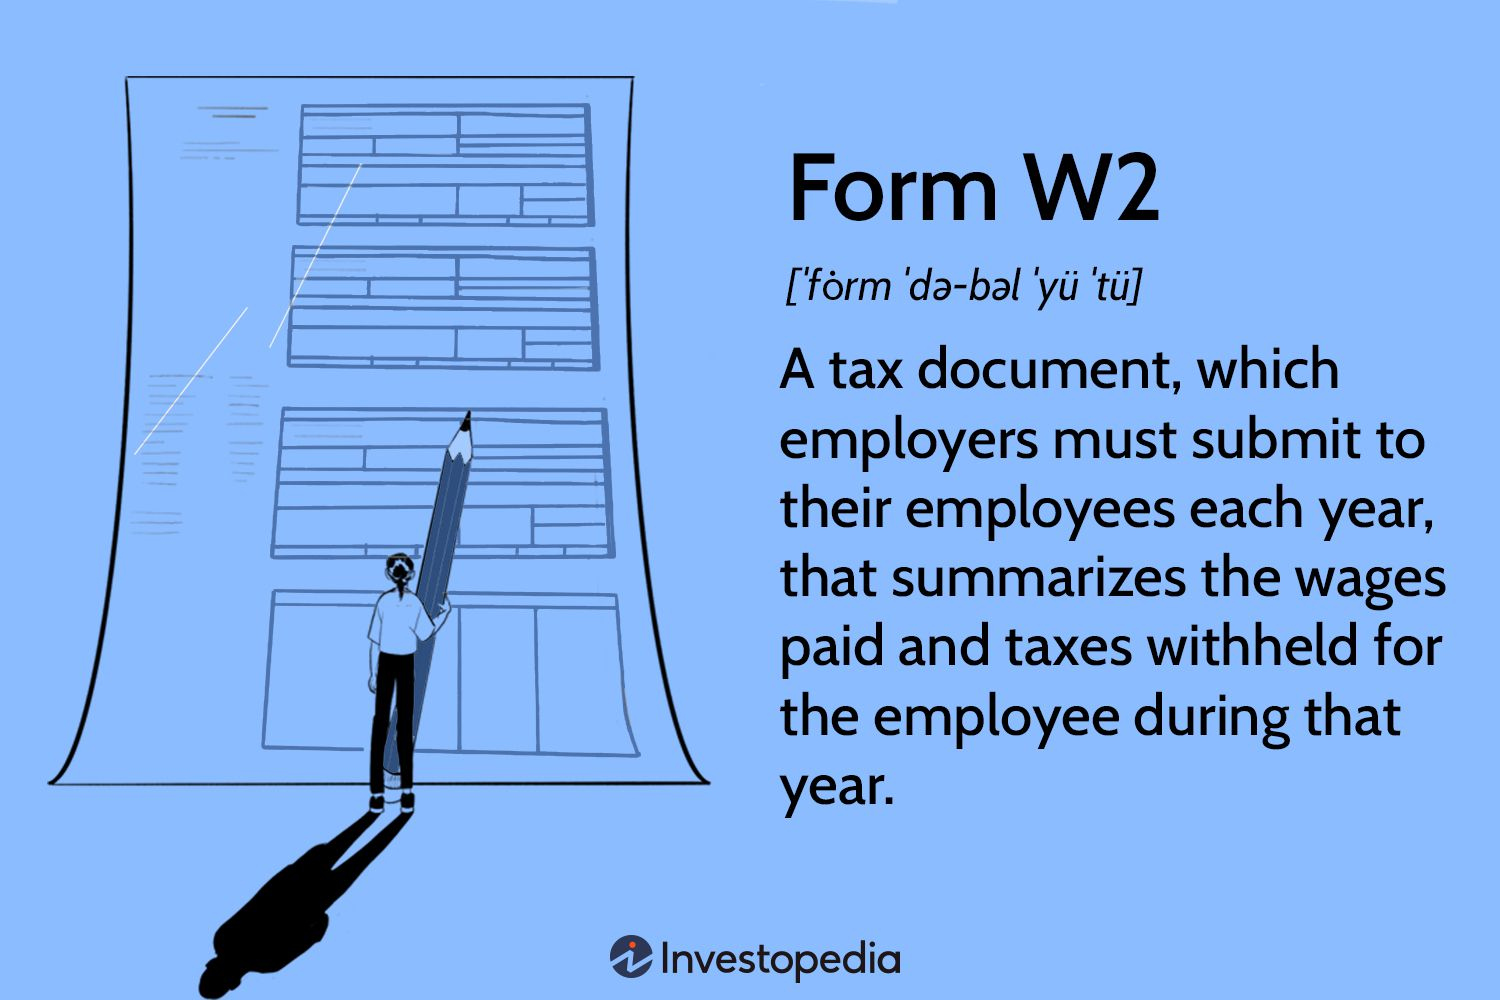 Form W-2 Wage And Tax Statement: What It Is And How To Read It regarding W2 Tax Form Explained